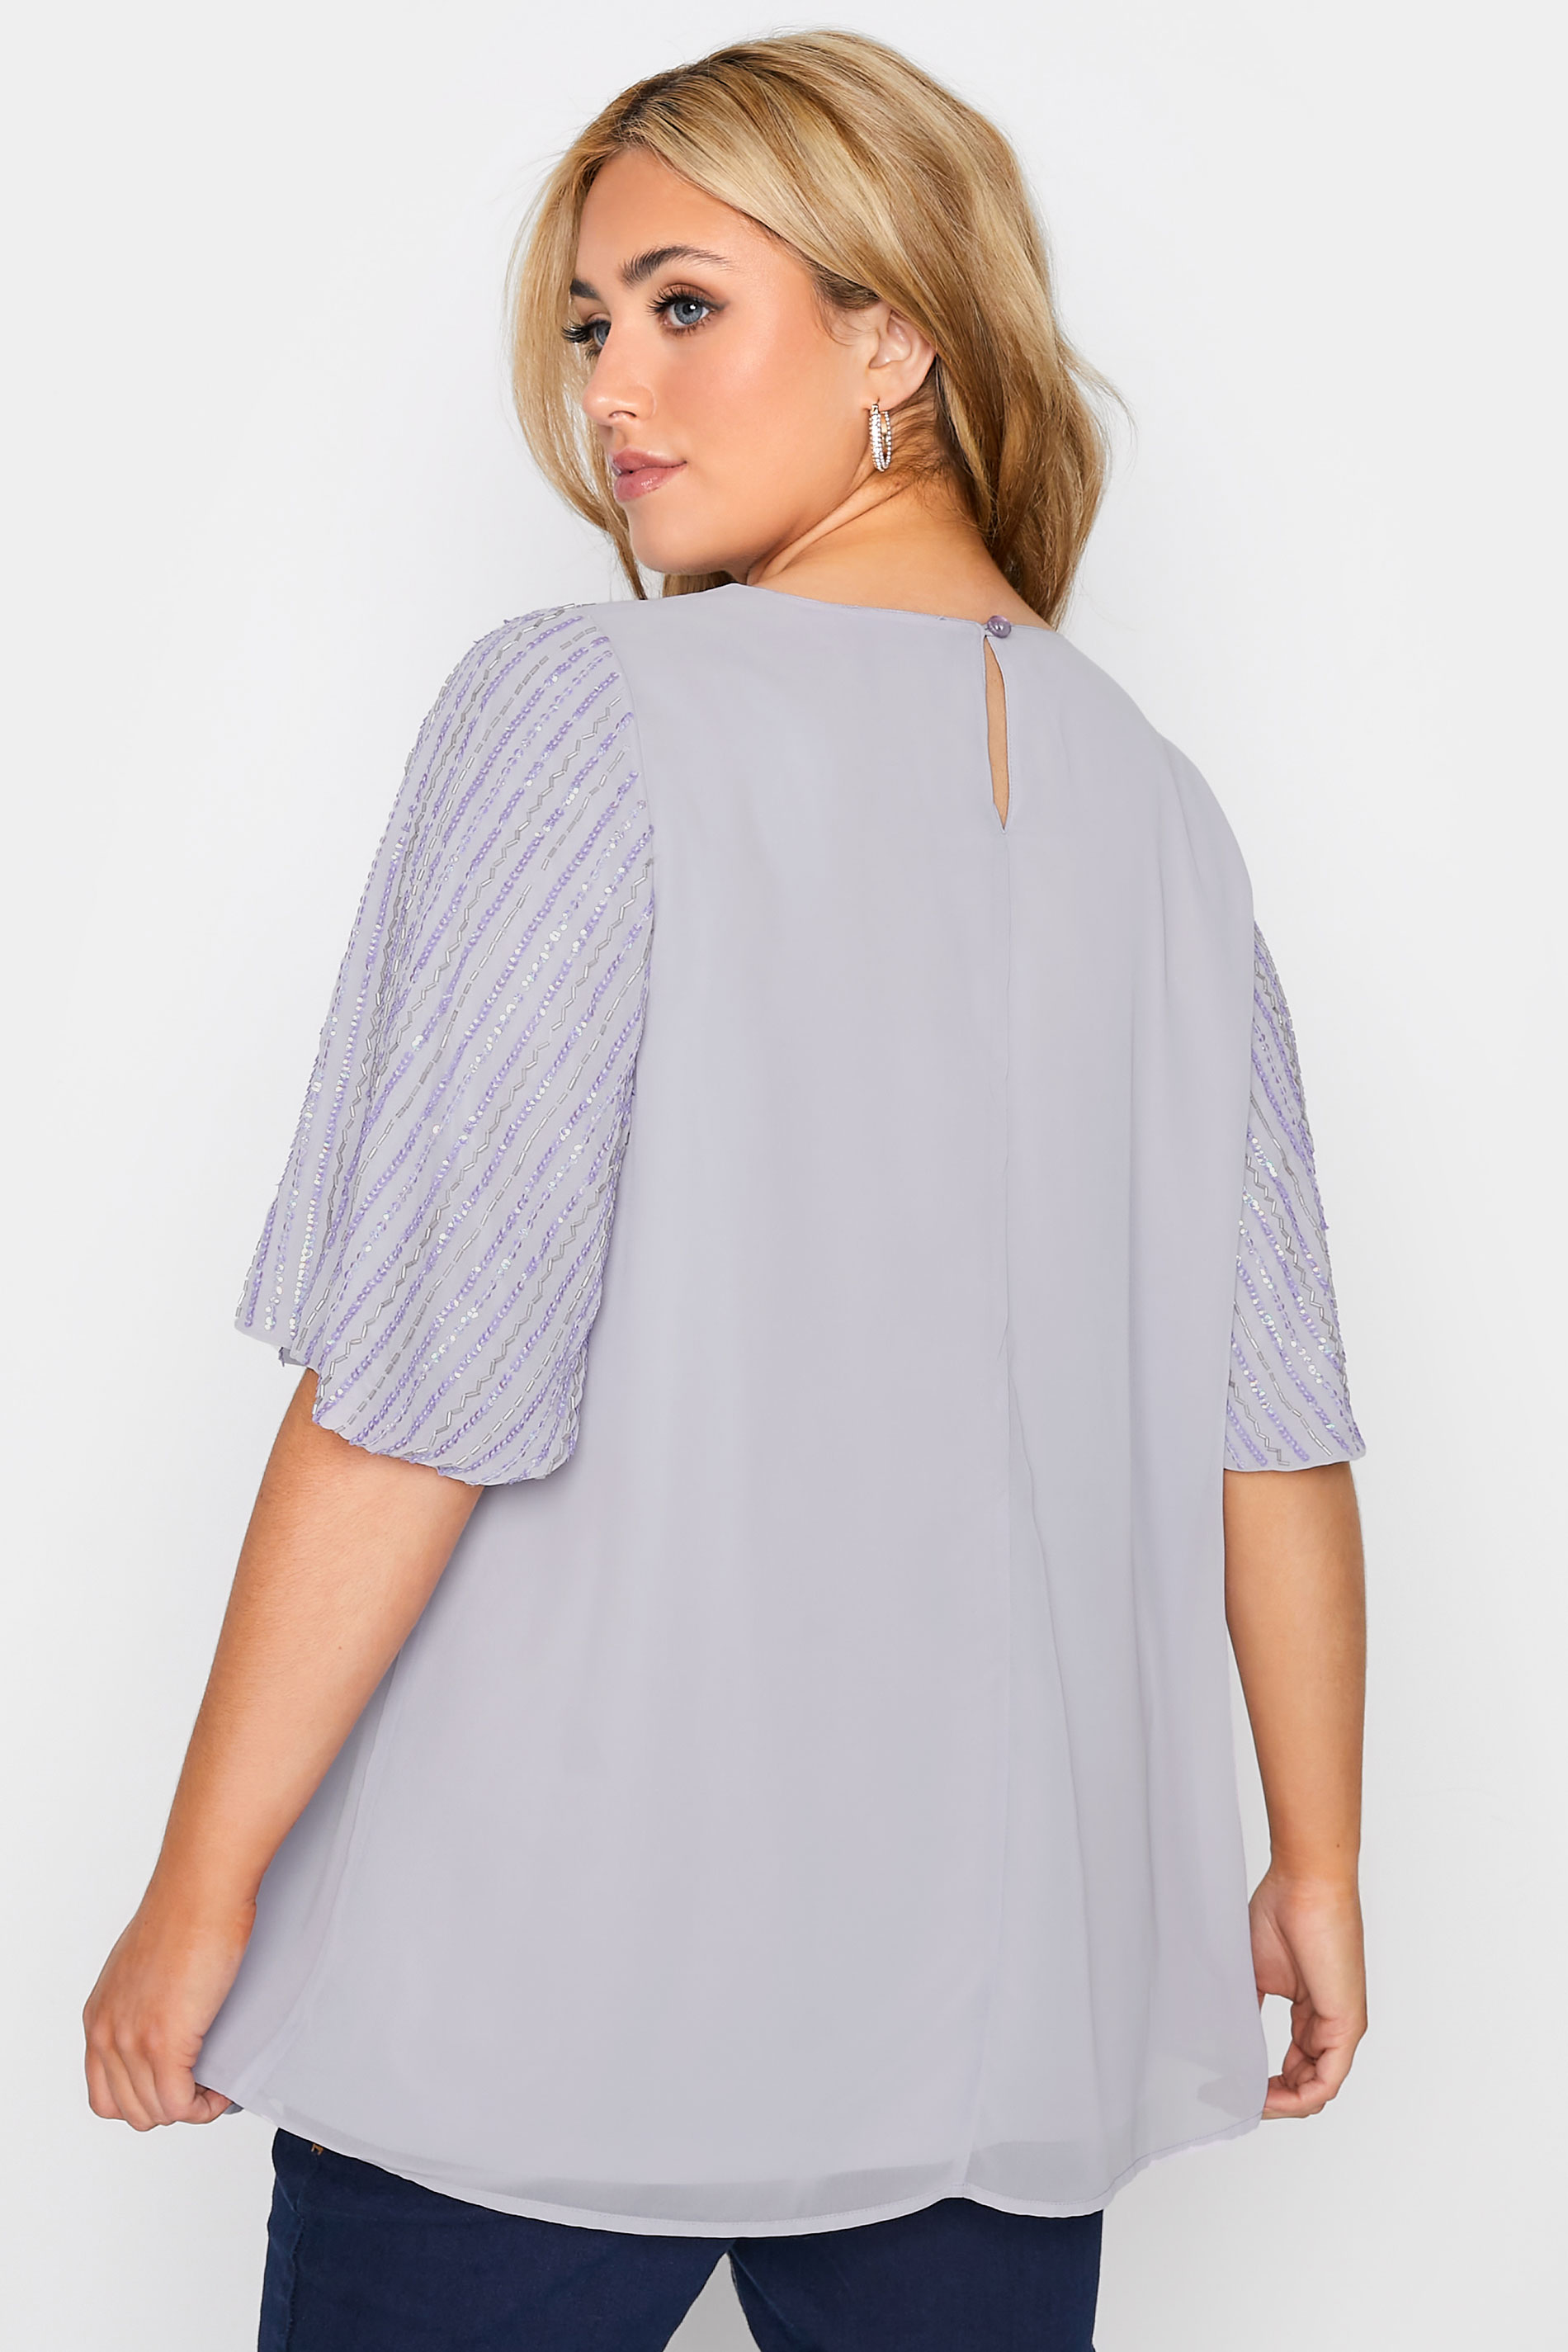 LUXE Plus Size Lilac Purple Sequin Hand Embellished Sweetheart Top | Yours Clothing 3